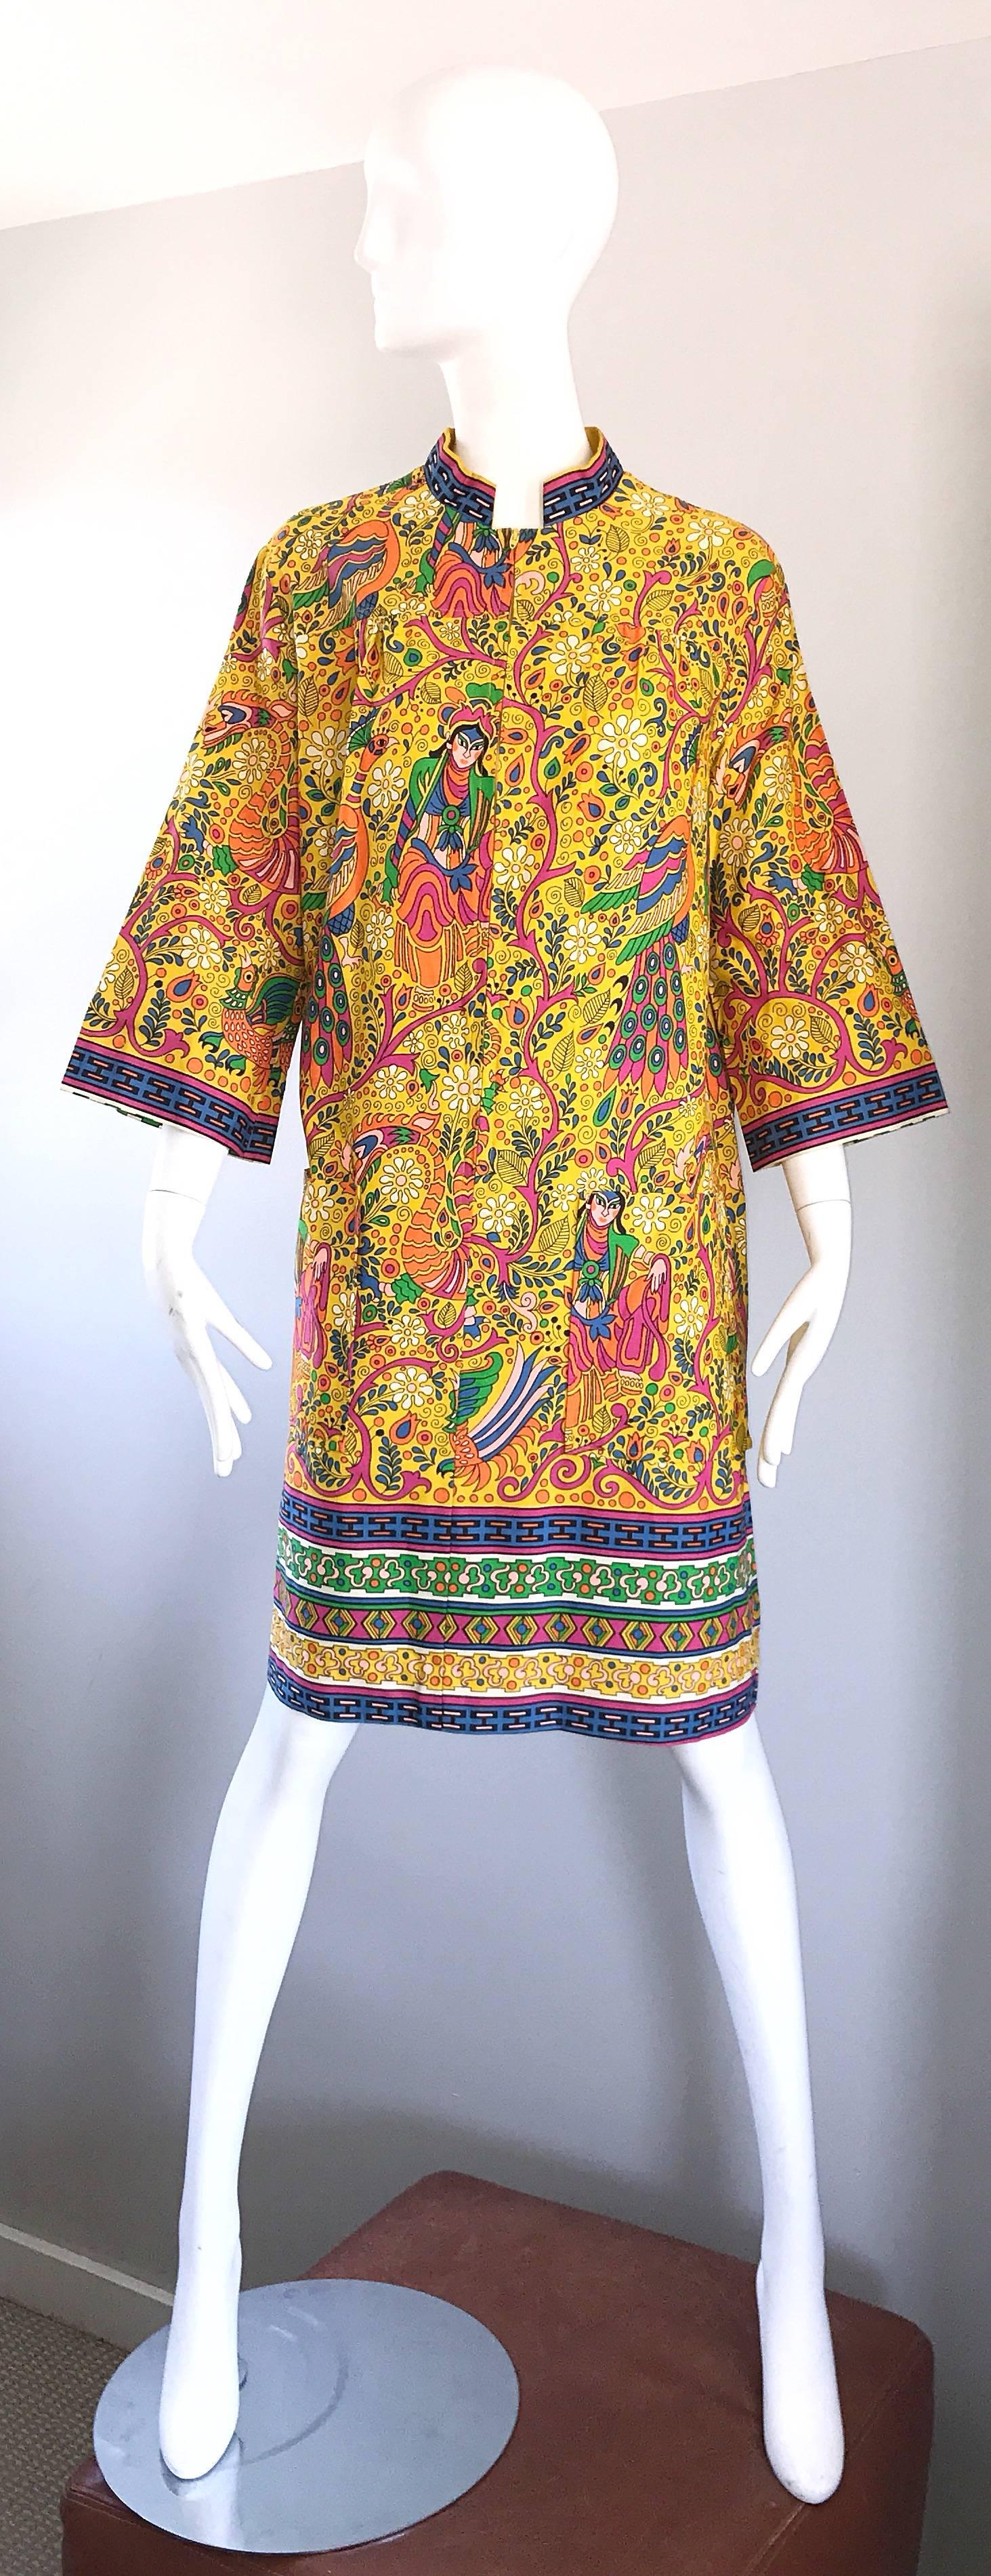 Incredible 1960s Asian Empress Oriental ethnic dragon print cotton tunic dress! Amazing oriental themed prints in vibrant colors of yellow, green, pink, blue, orange, purple, and white throughout. Chic 3/4 length bell sleeves. Hidden zipper up the